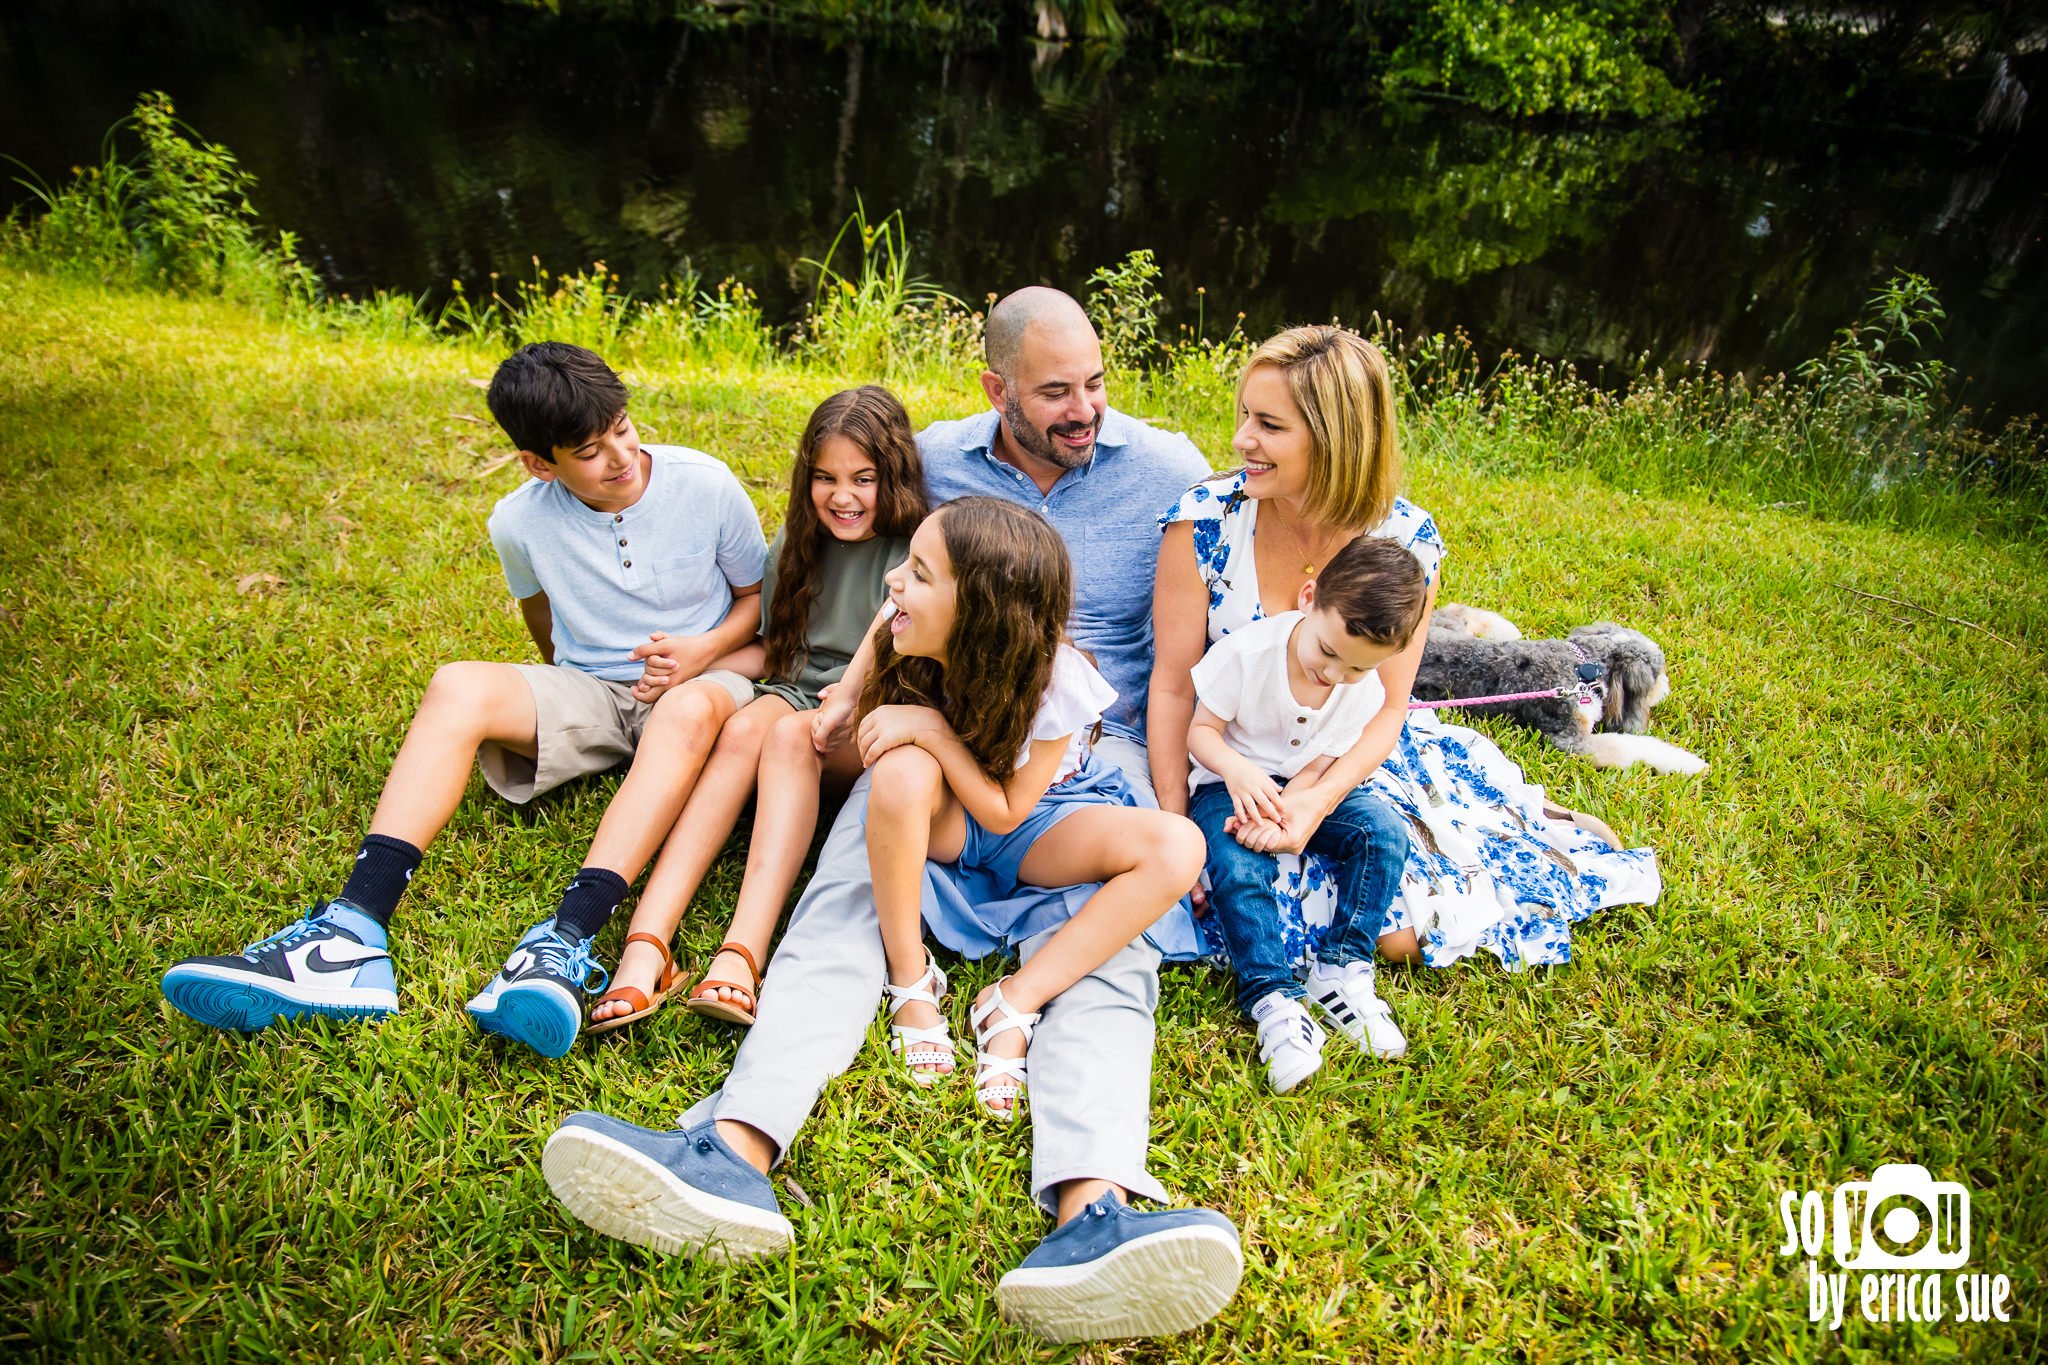 21-lifestyle-family-photographer-riverbend-park-jupiter-fl-so-you-by-erica-sue-ES1_8958.JPG